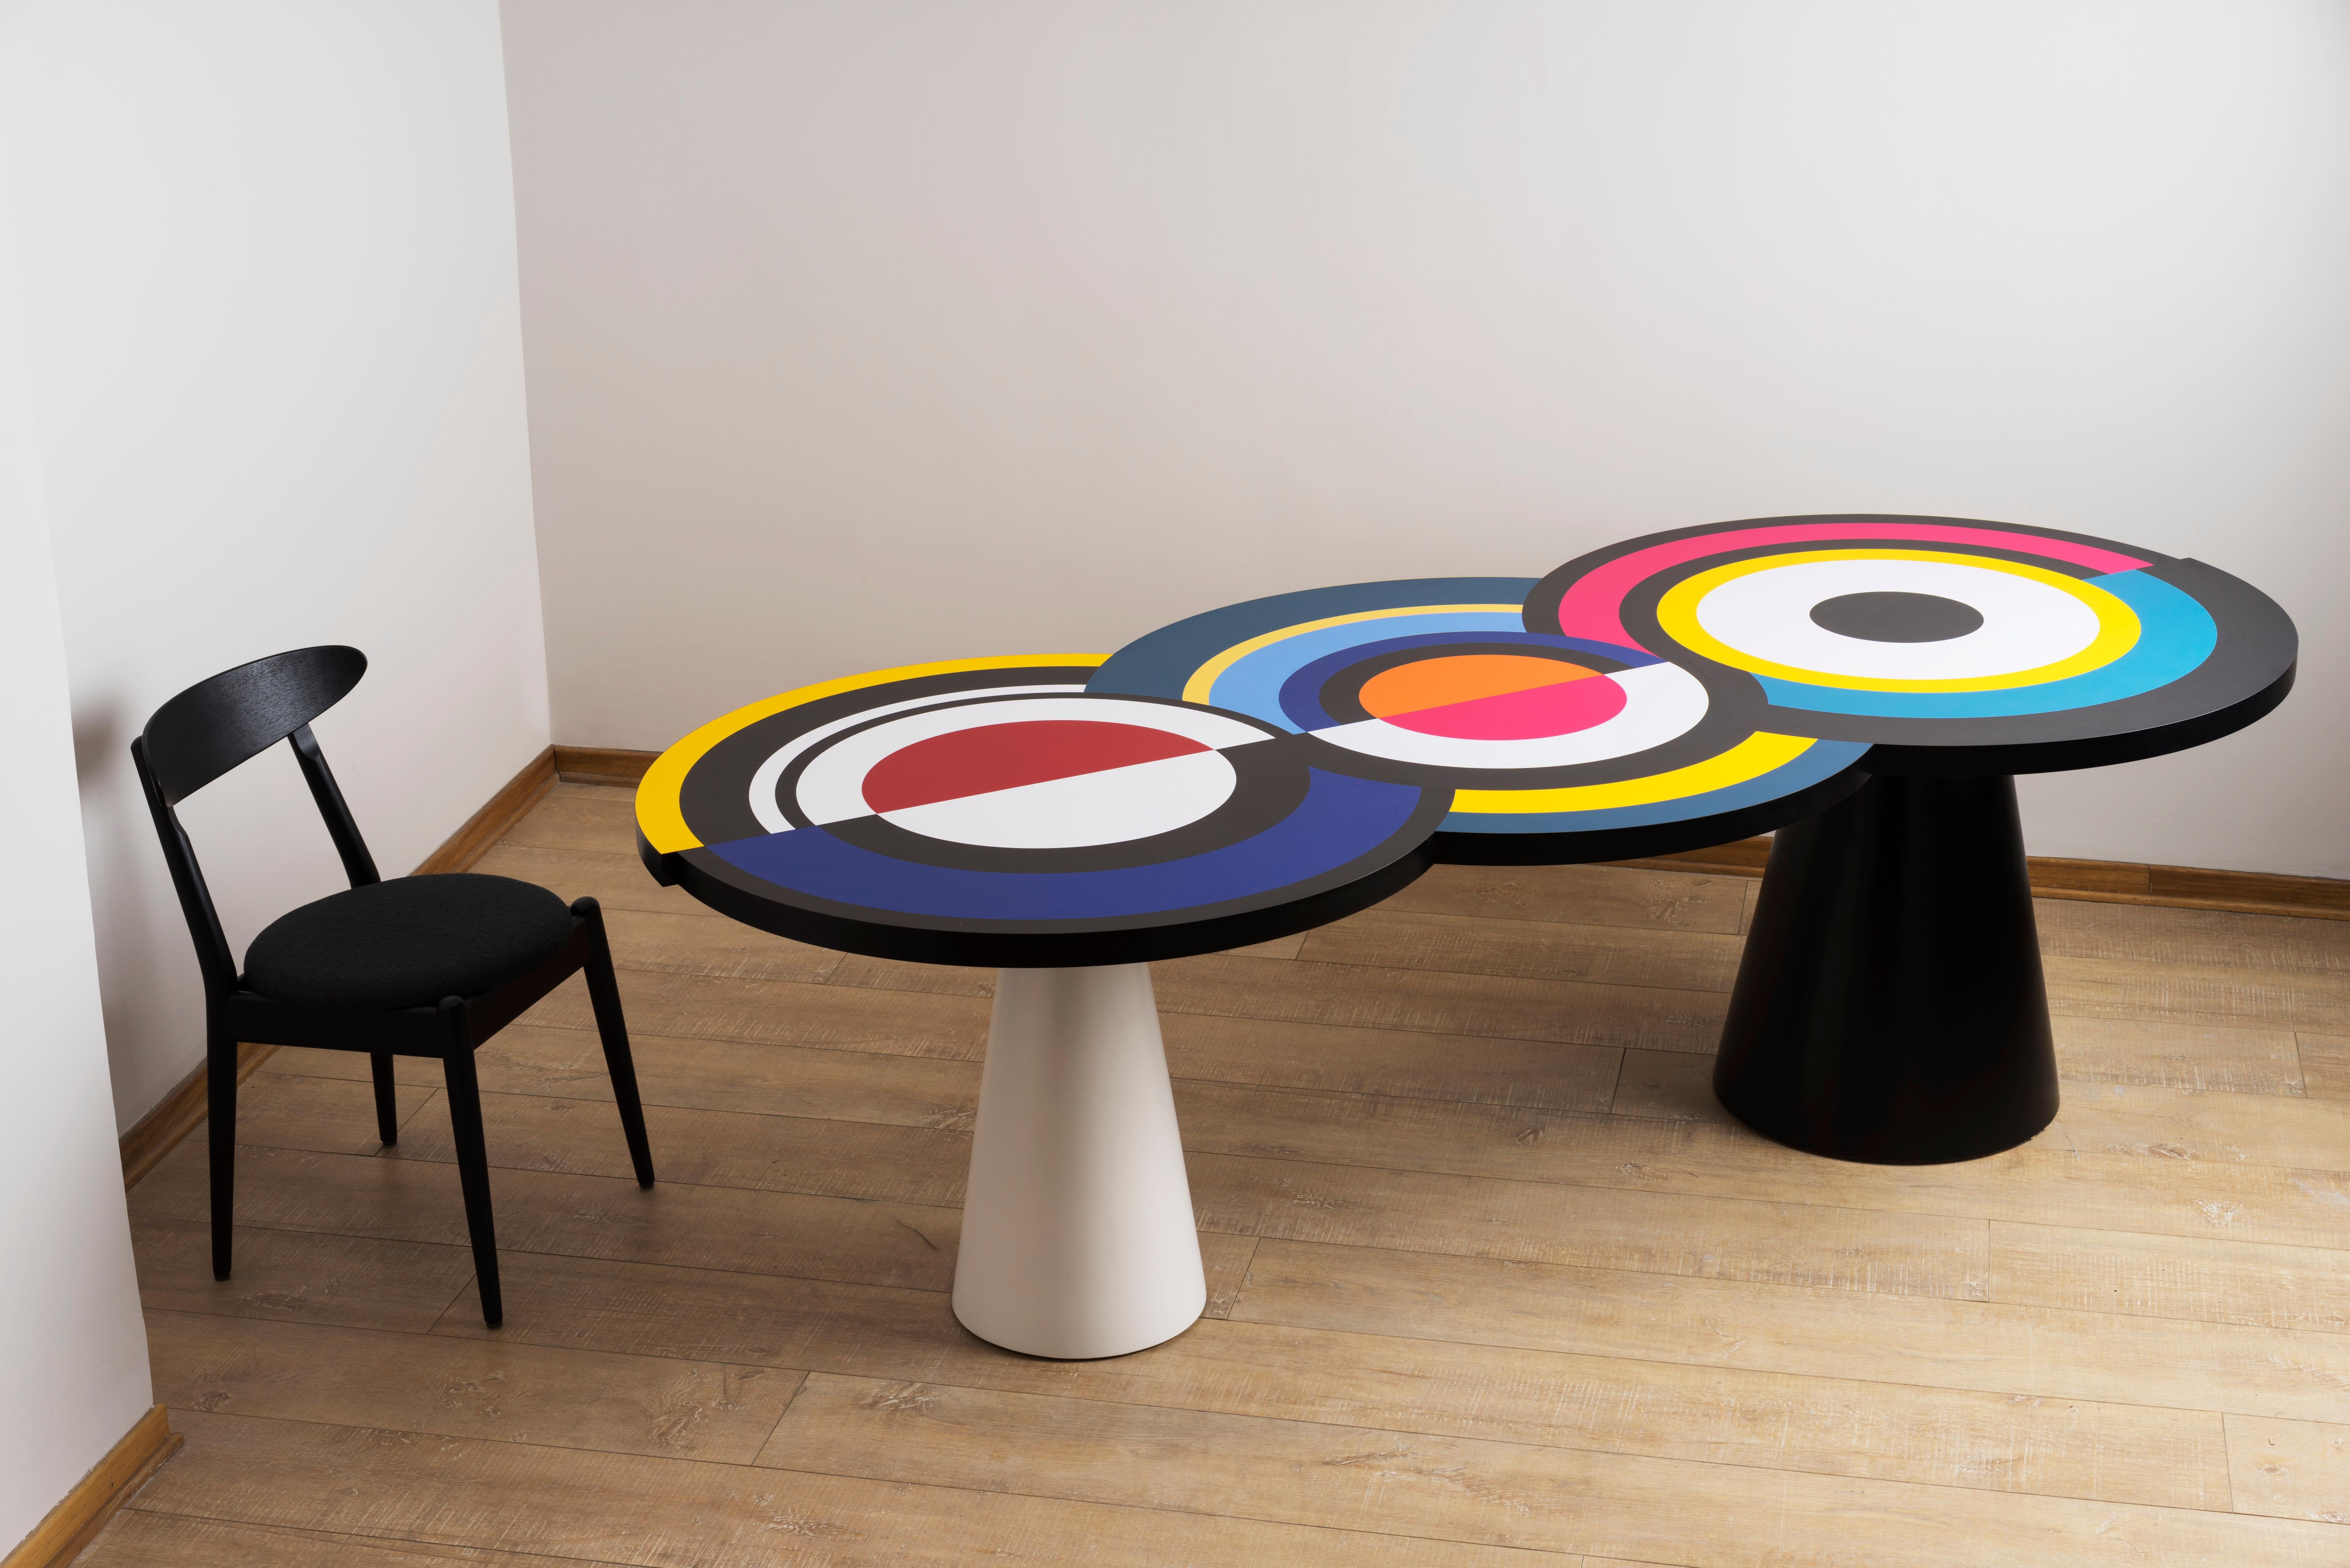 French Sonia et Caetera Dining Table M1 Designed by Thomas Dariel